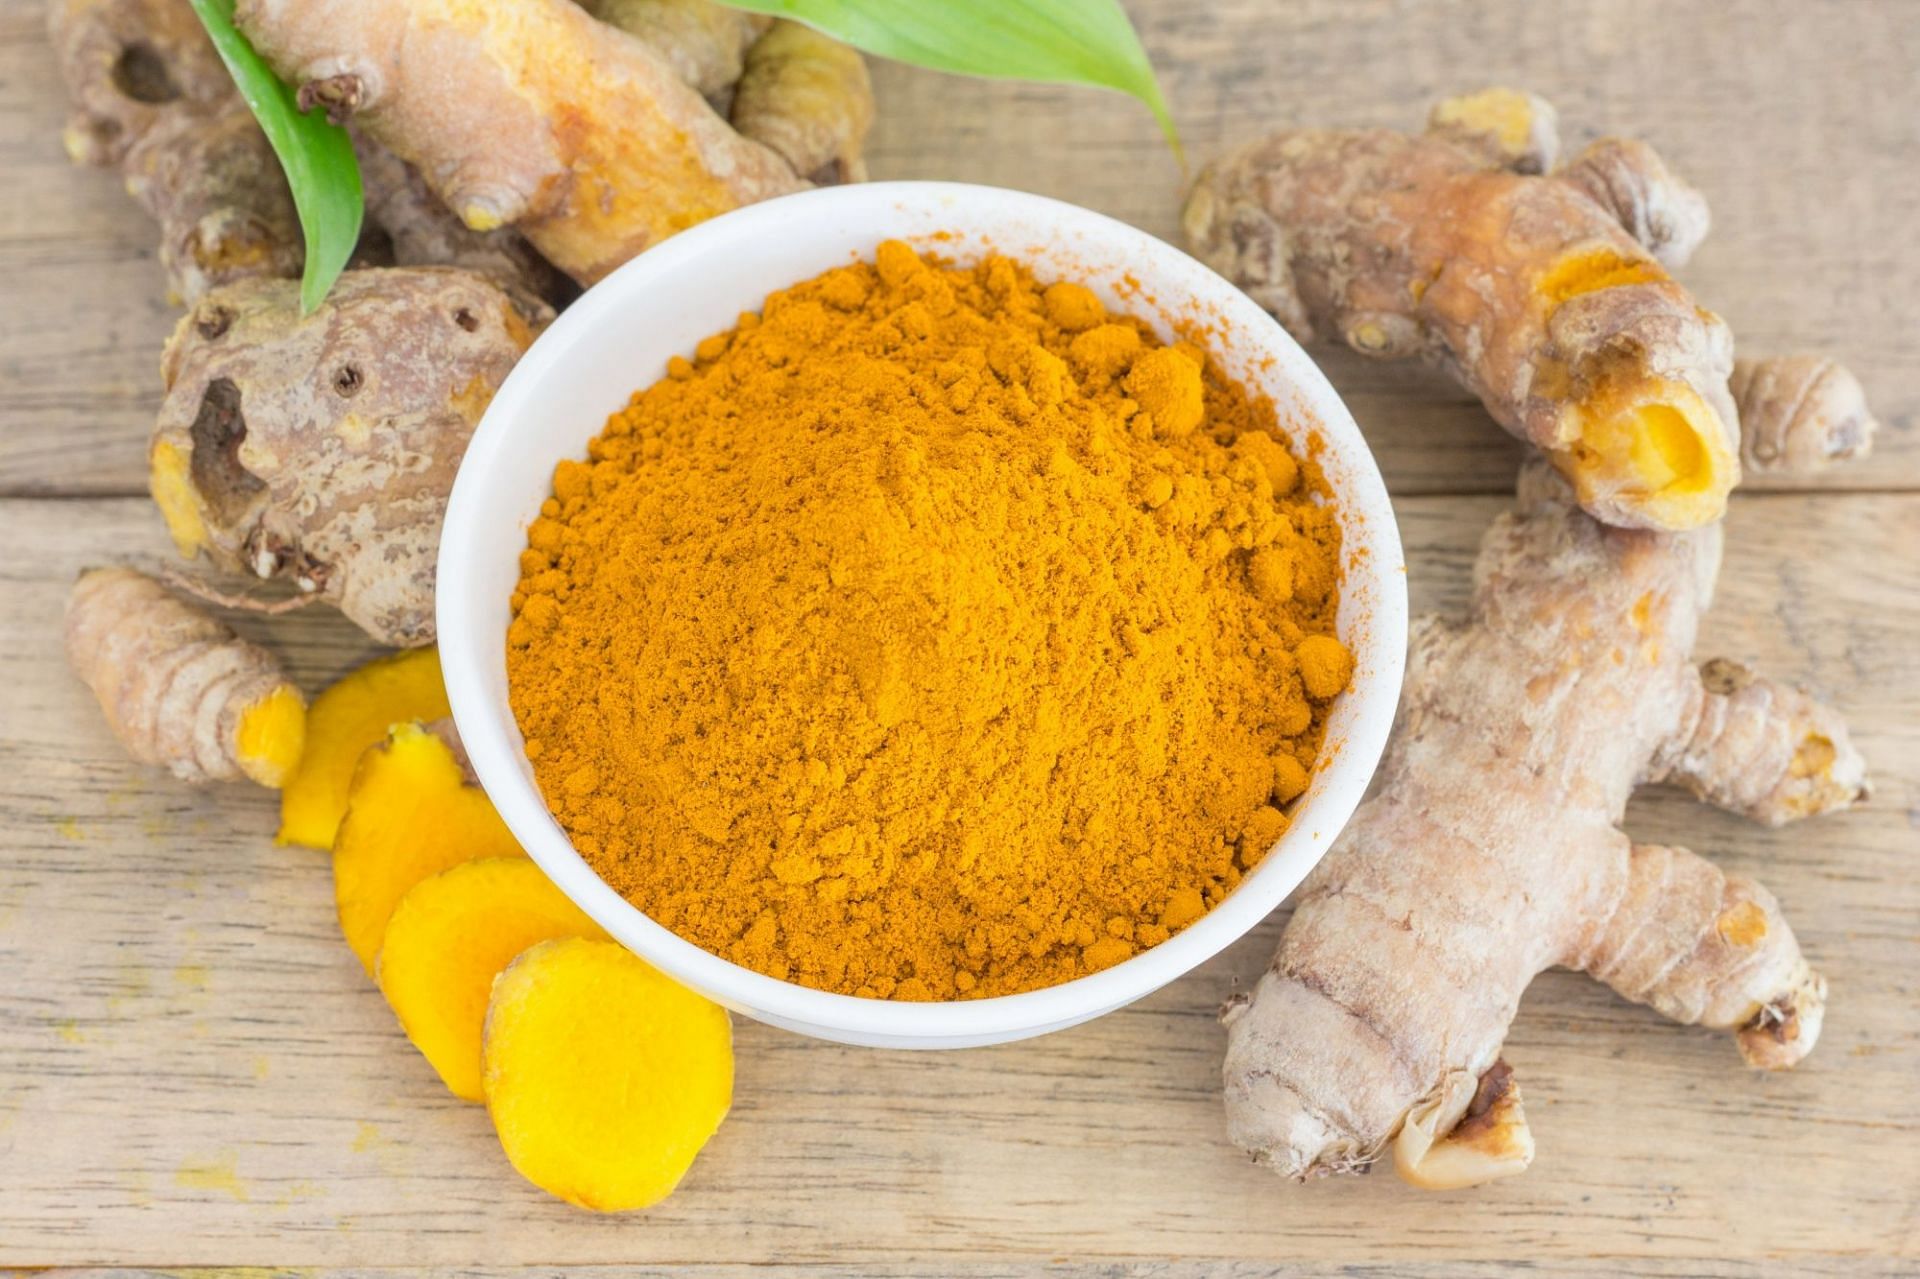 The anti-inflammatory properties of turmeric can be beneficial and act as a good remedy for this condition. (Image by jigsawstocker on Freepik)